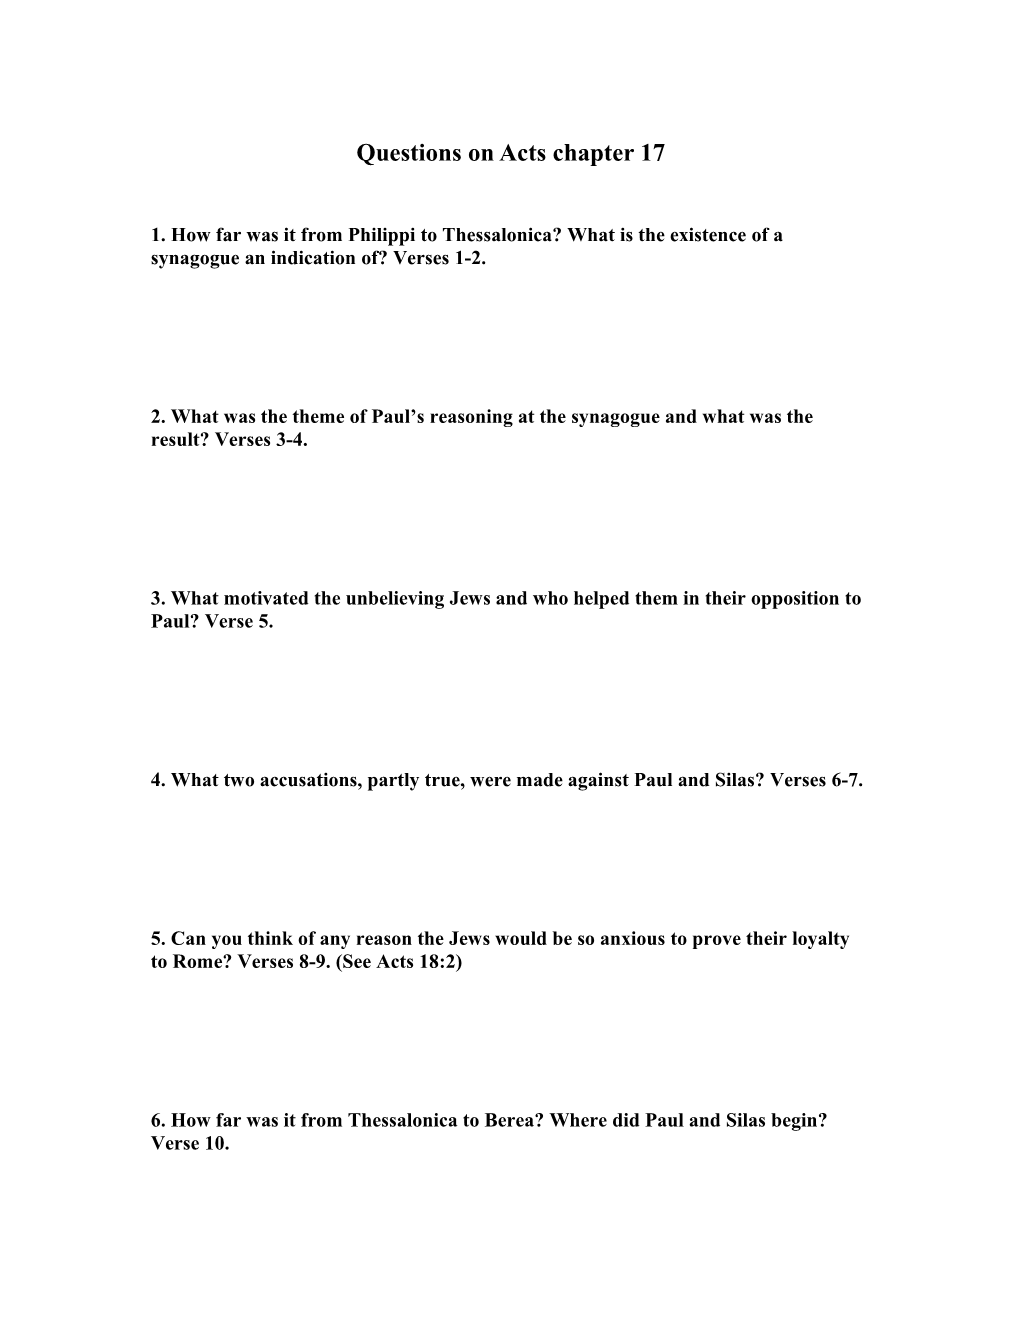 Questions on Acts 17